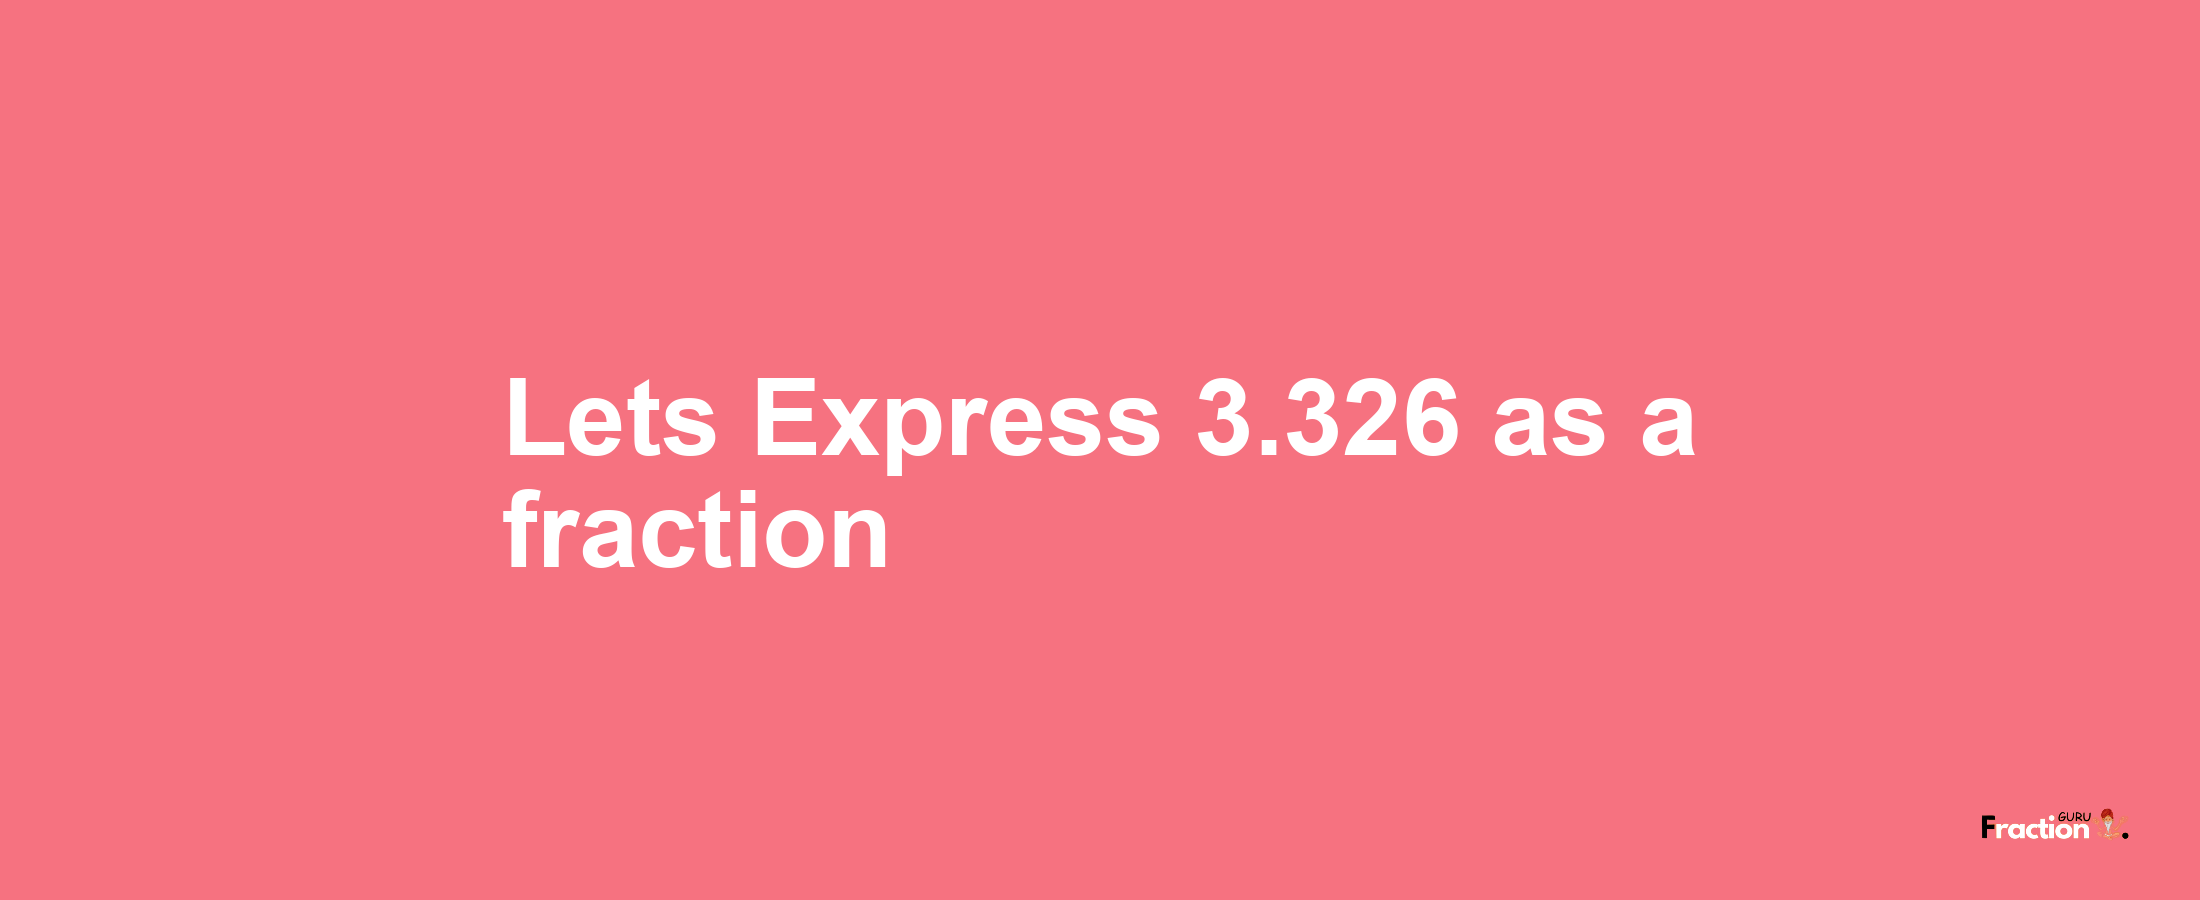 Lets Express 3.326 as afraction